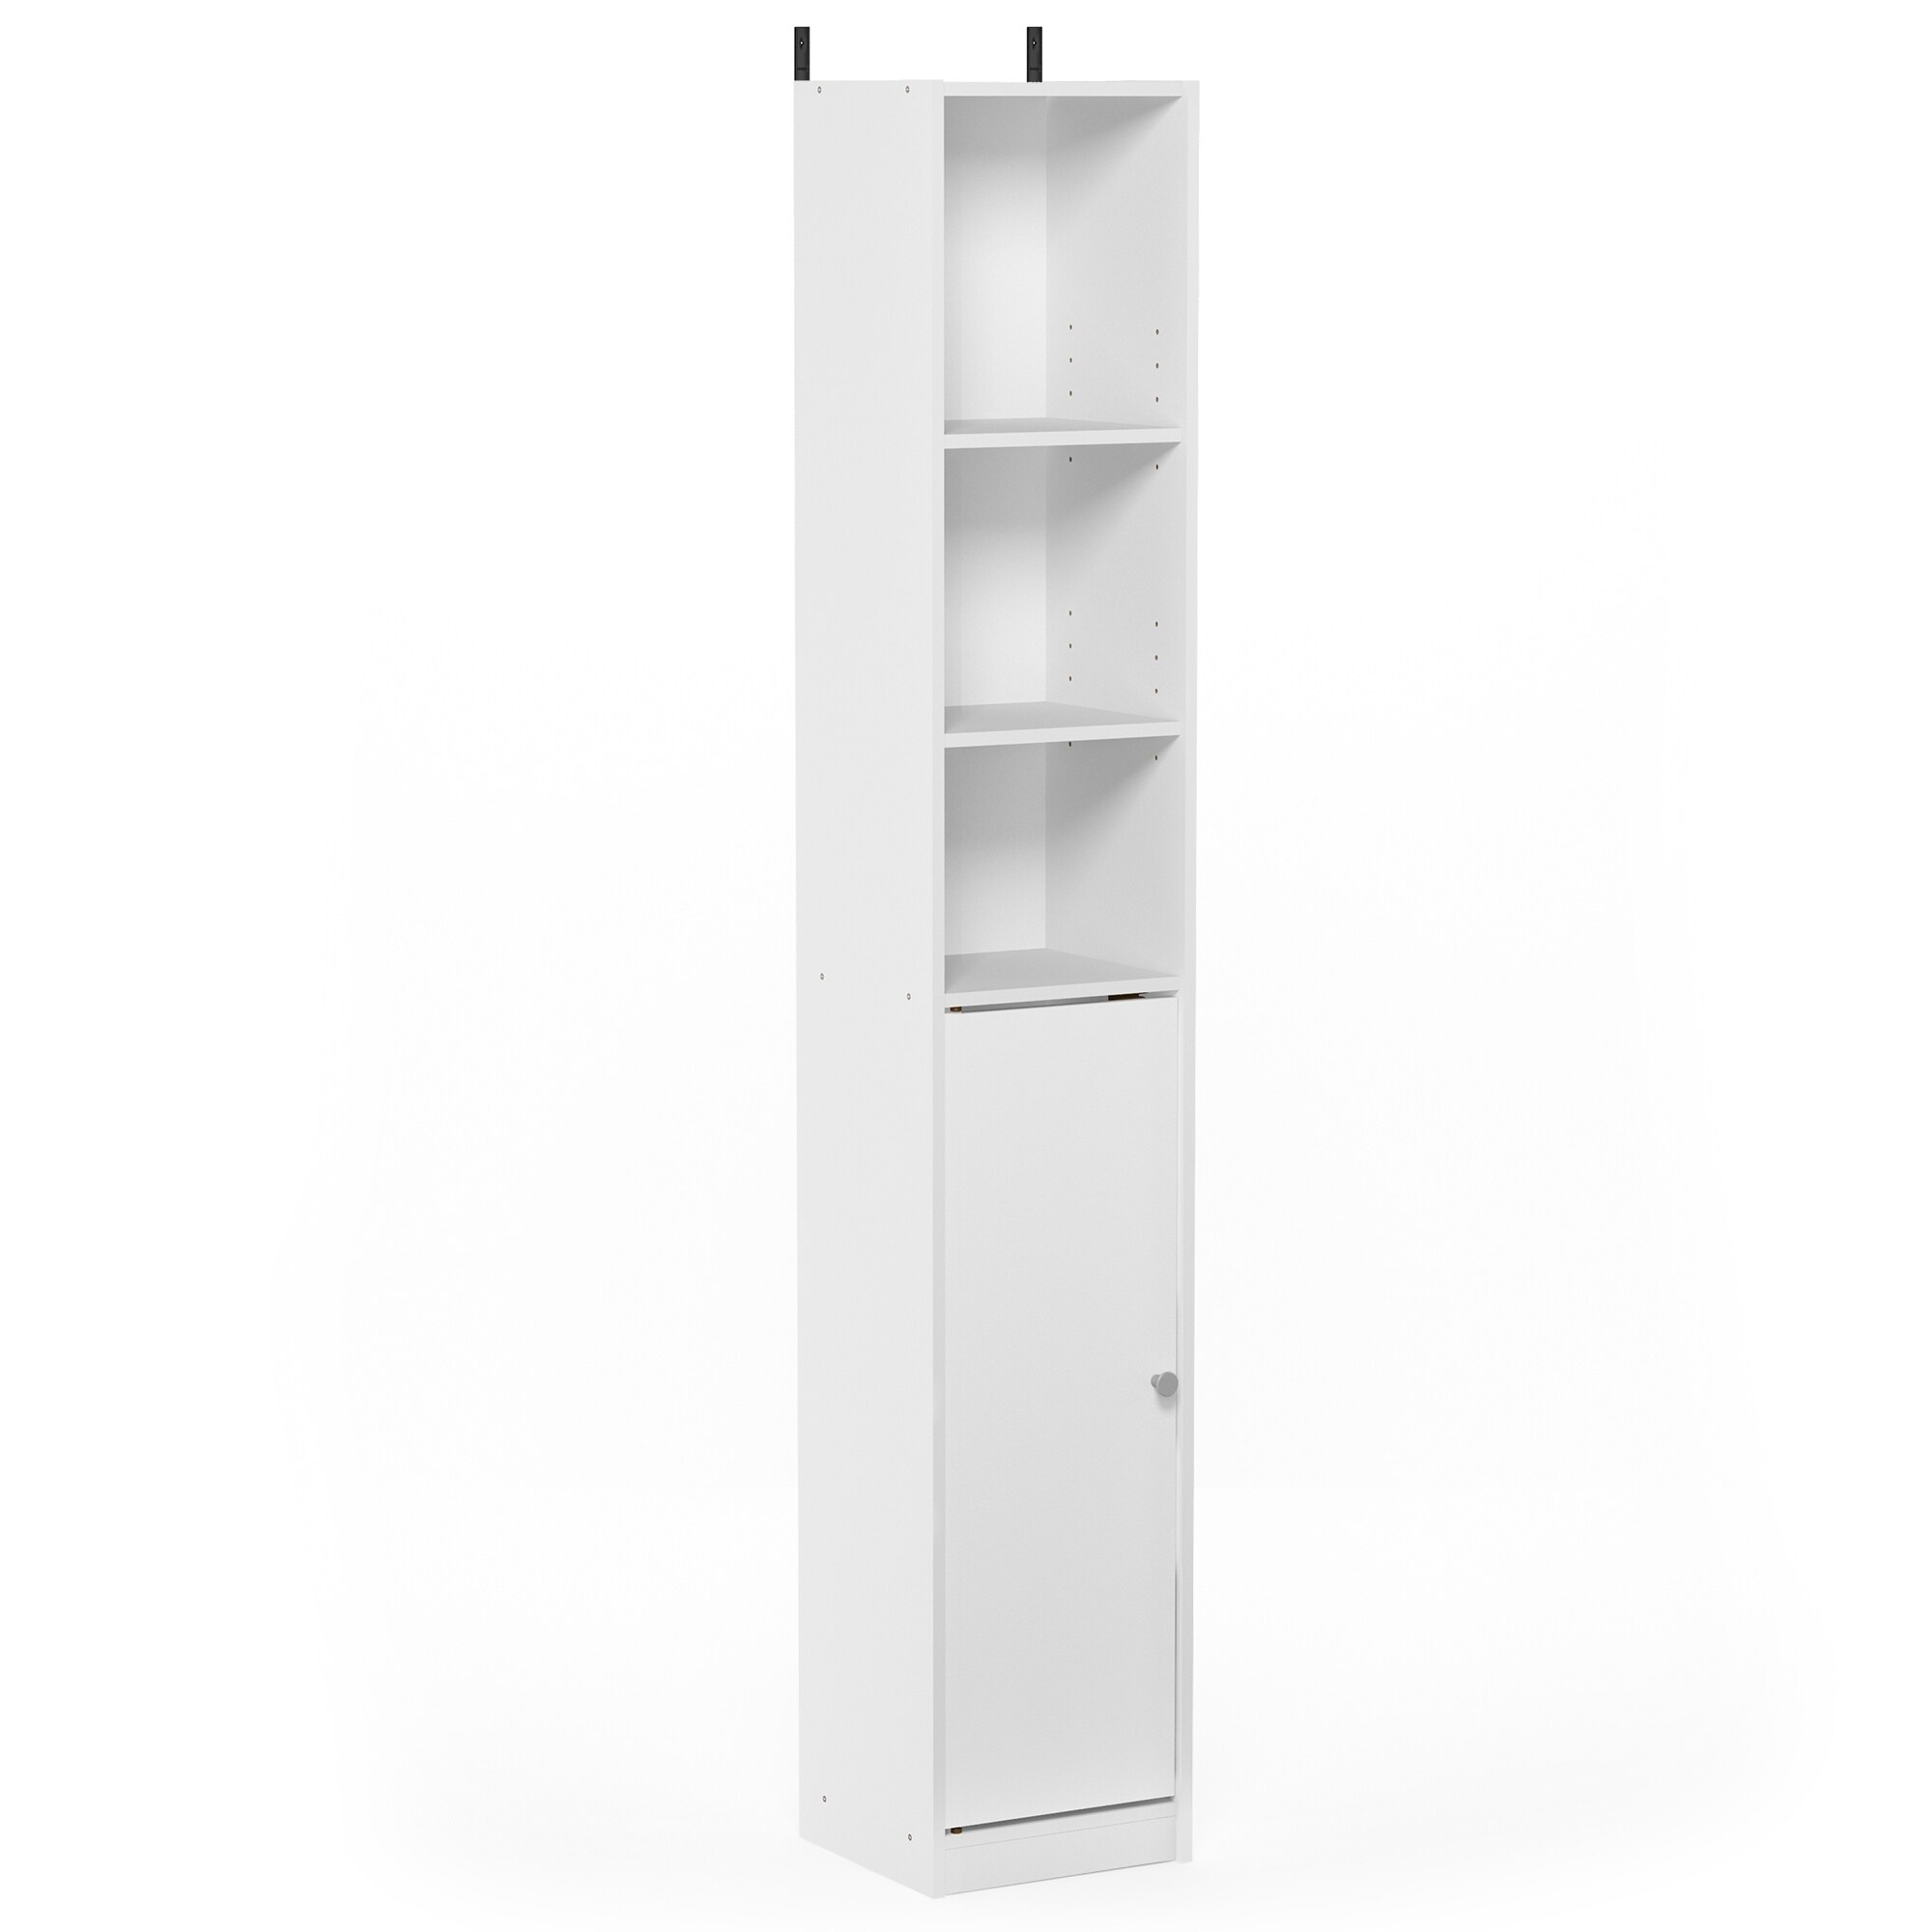 Furinno Indo L-Shaped Desk with Bookshelves (White)